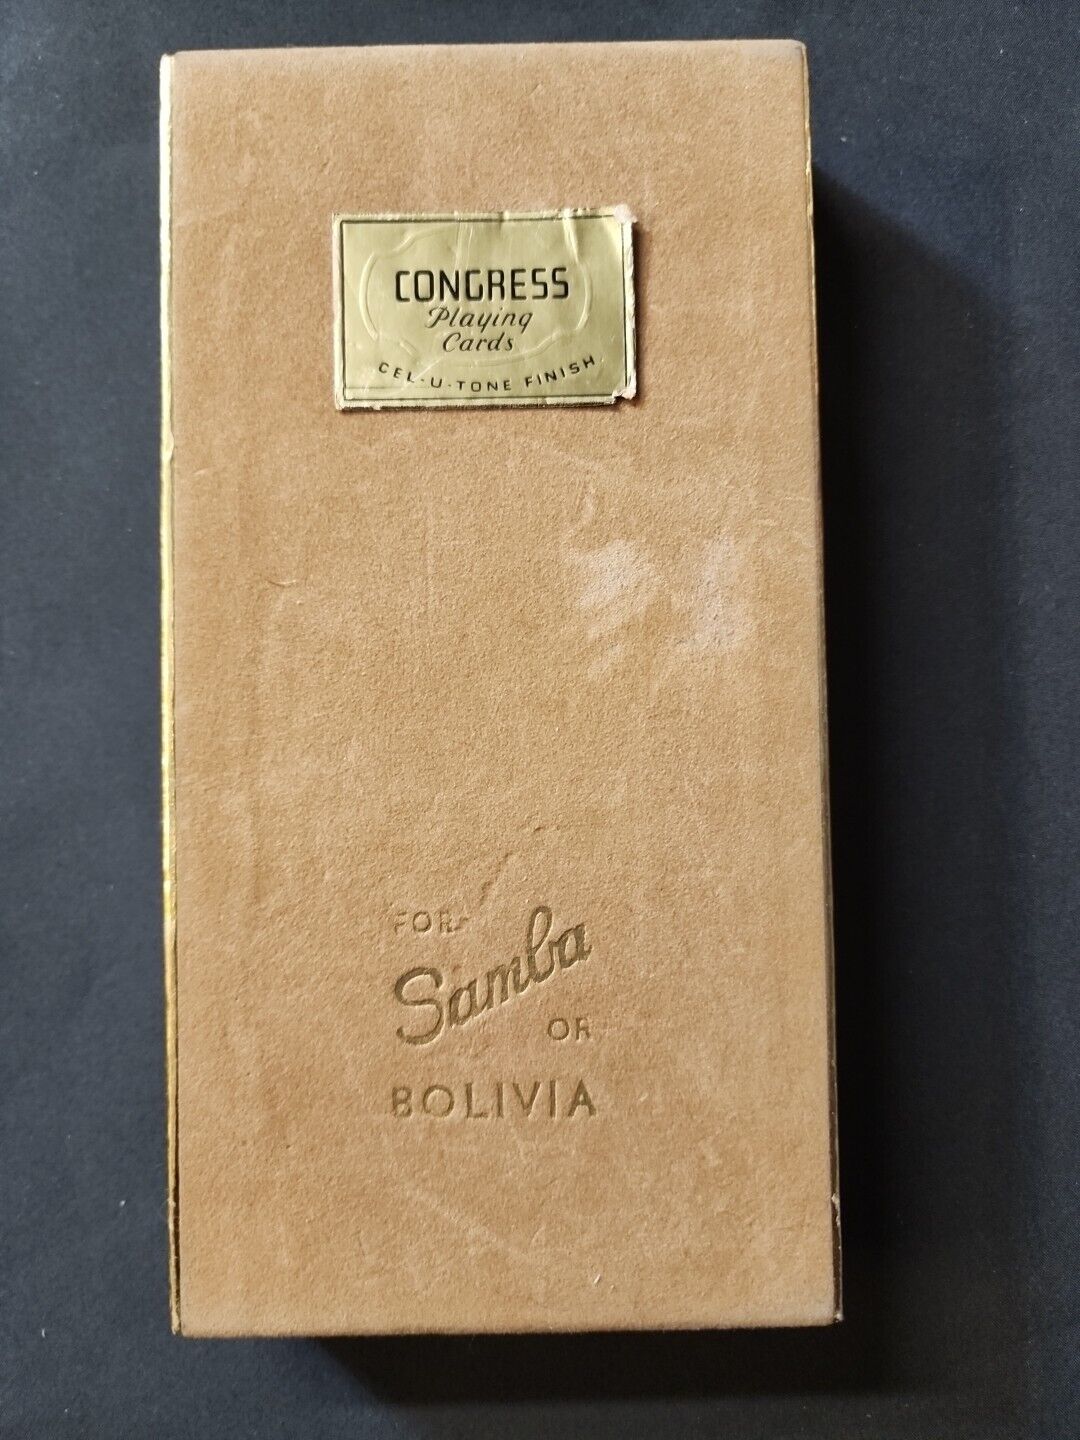 NEW SEALED Vintage Congress 3 Deck Playing Cards For Samba Or Bolivia Red Rose